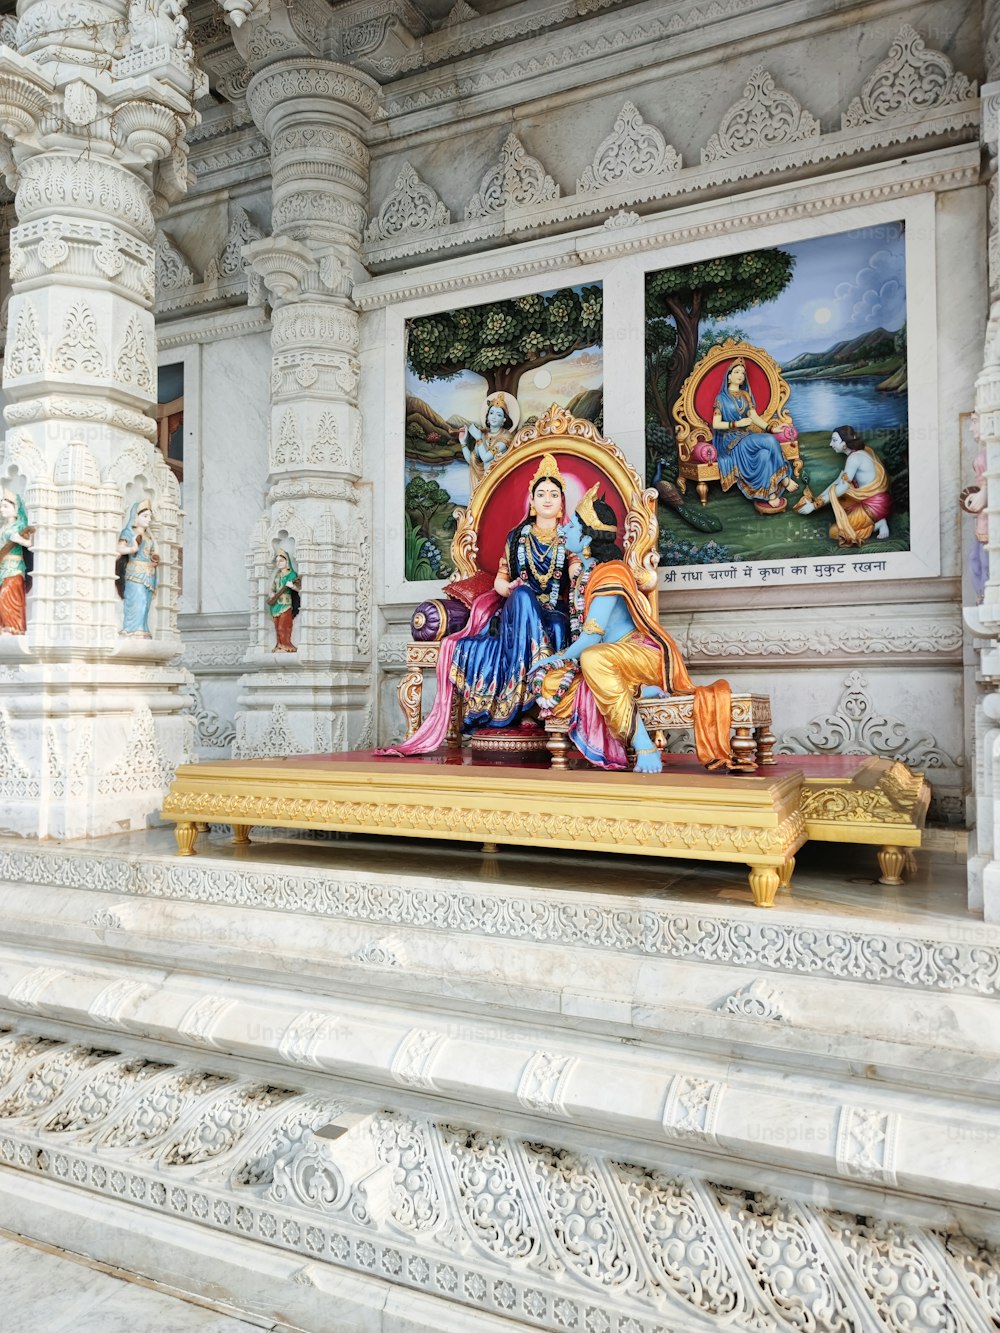 a statue of a person sitting on a throne